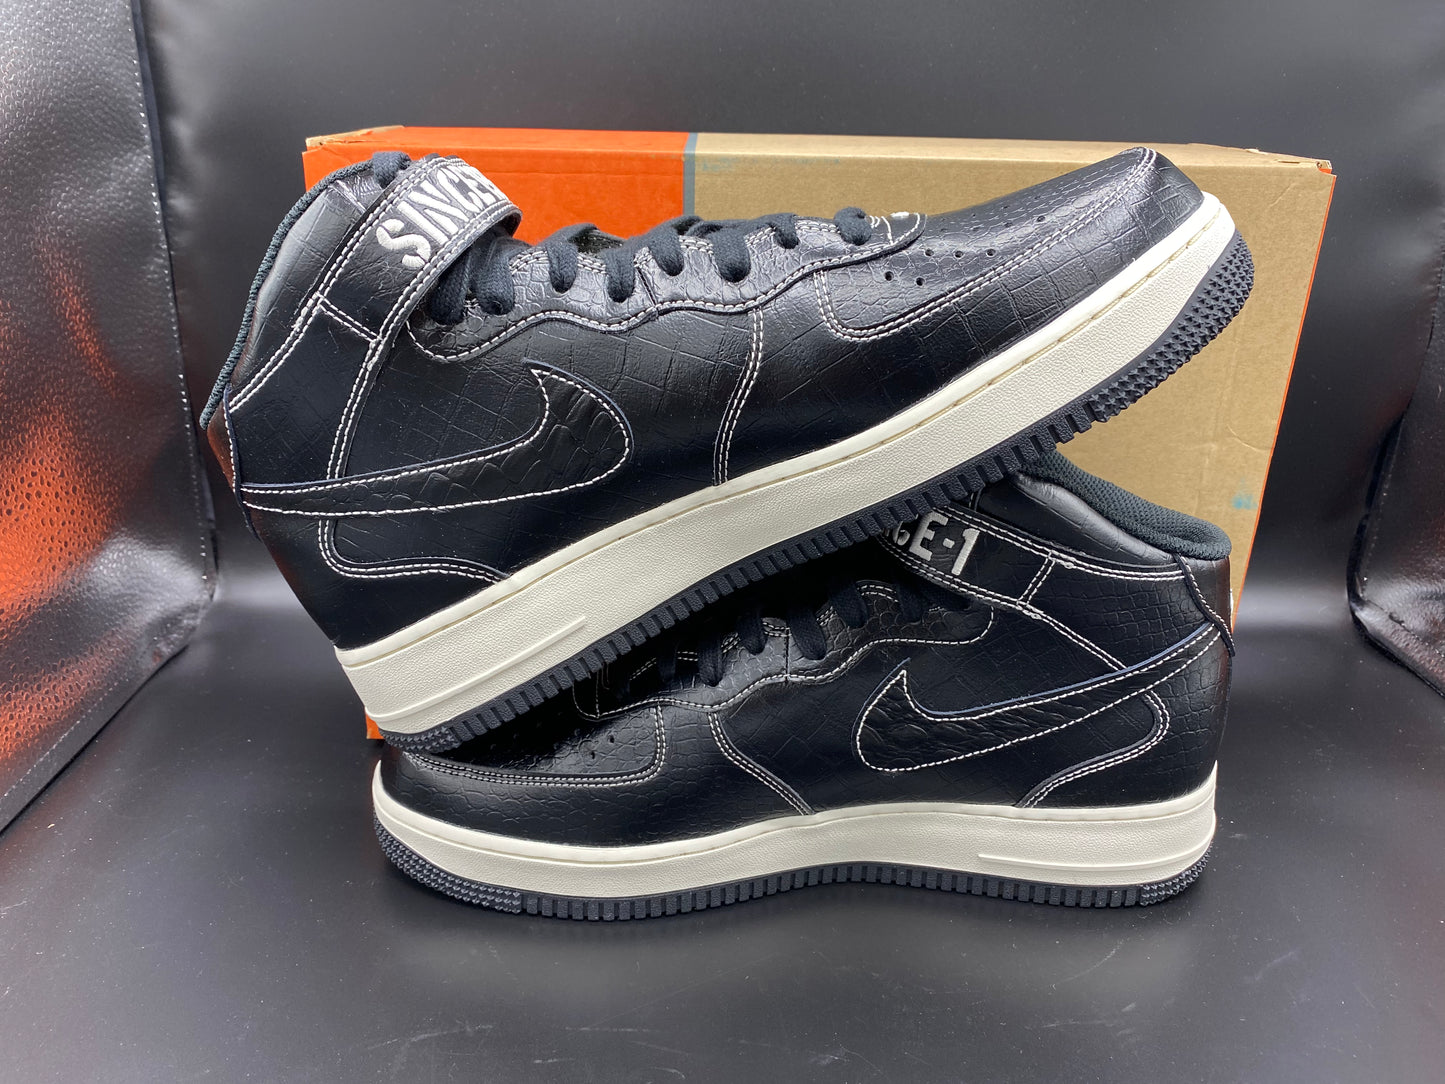 Air Force 1 Mid '07 LV8 "Our Force 1"